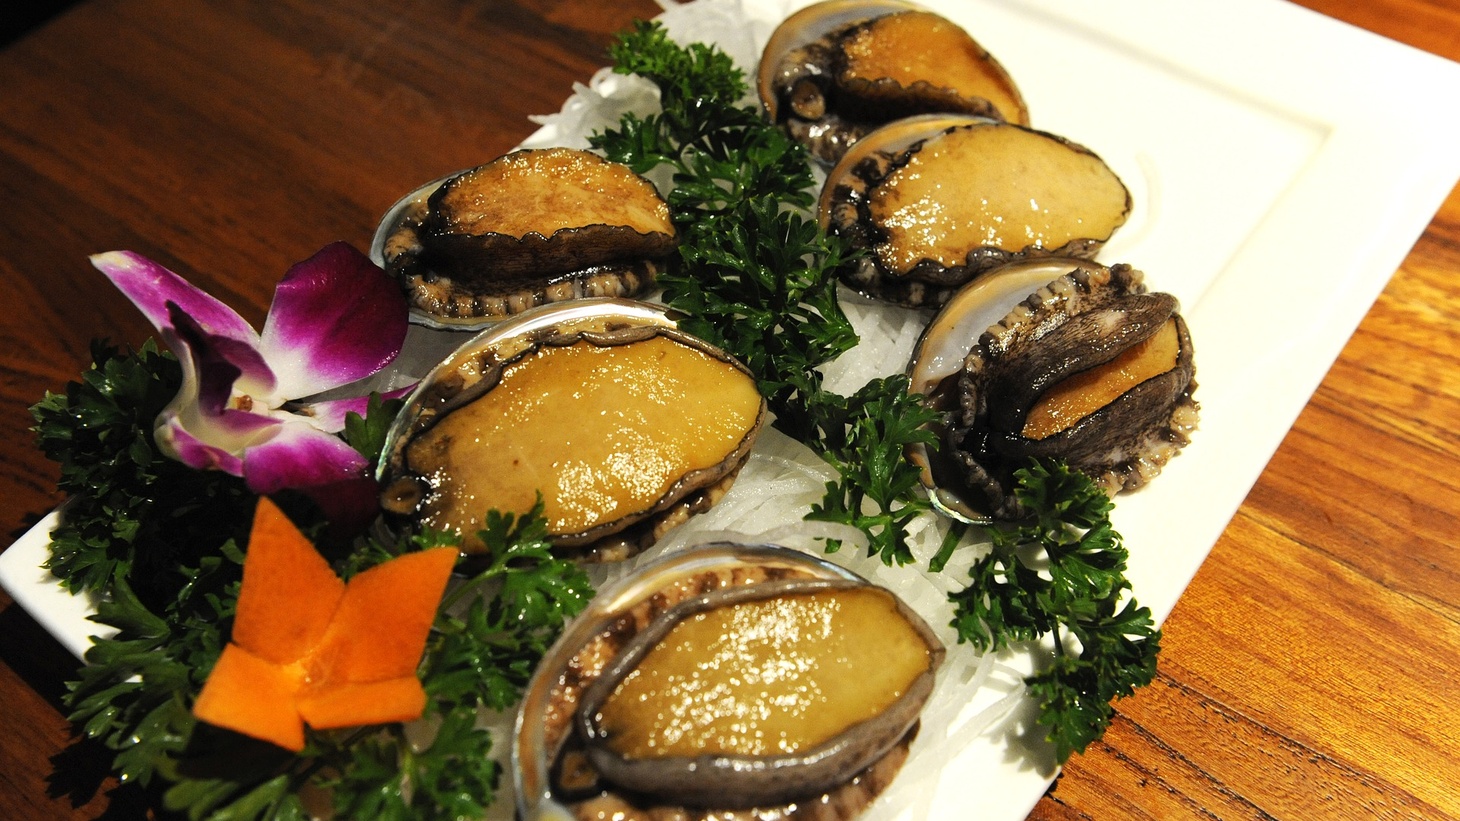 Red abalone fights for survival amid climate change | Press Play - KCRW